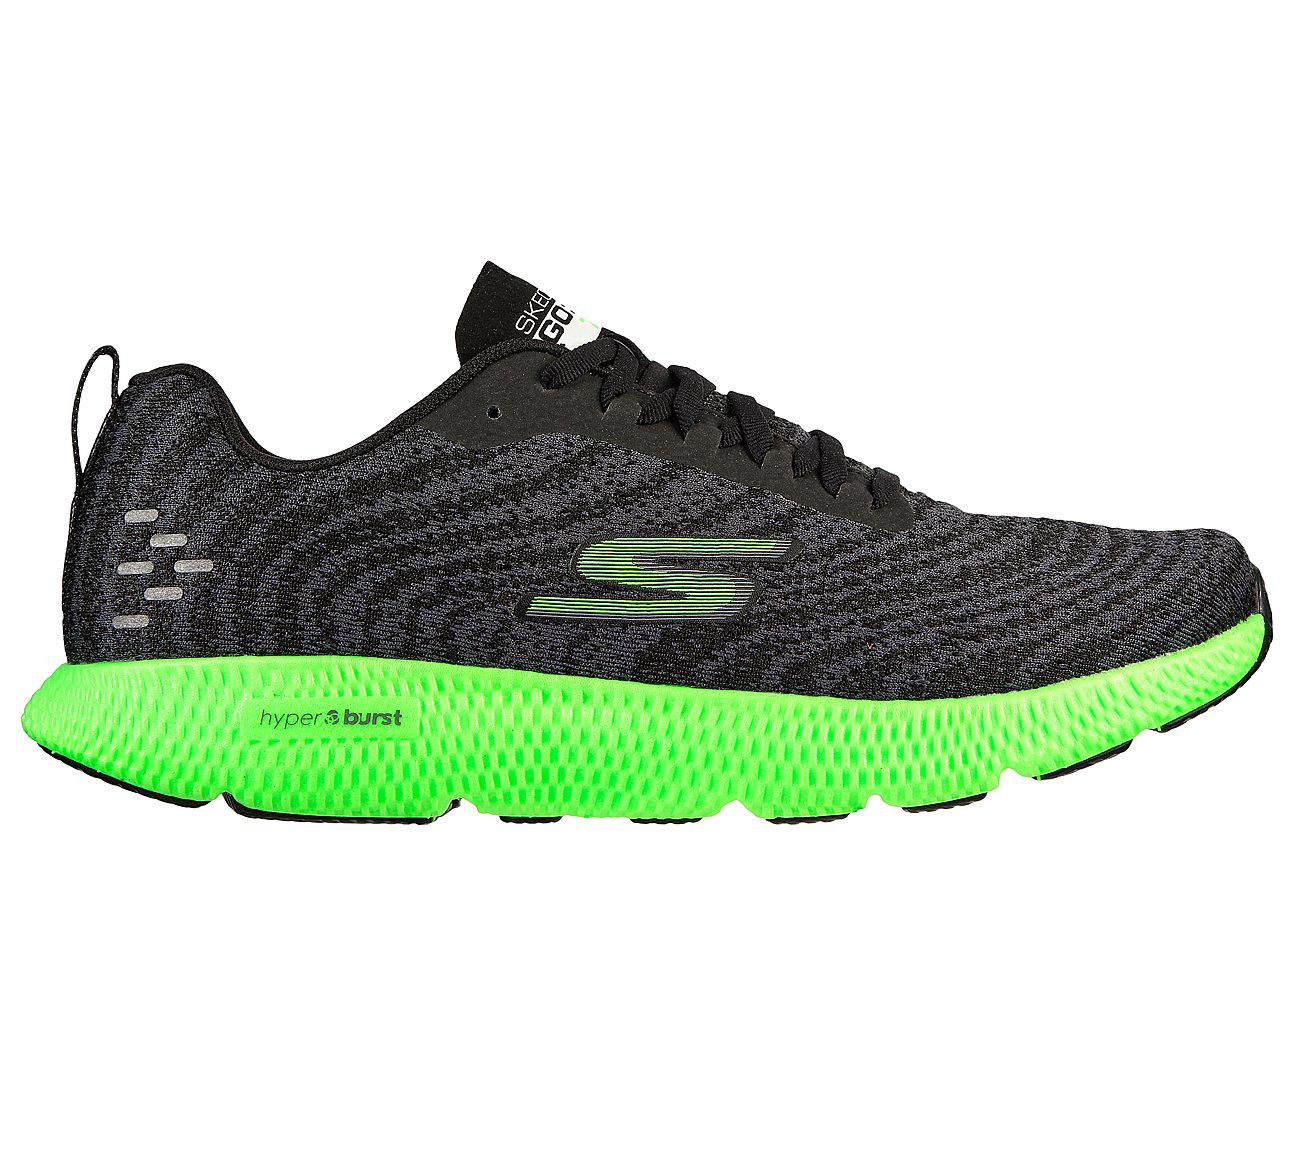 Skechers GOrun 7 review: A pair of high tech runners that can be worn every  day